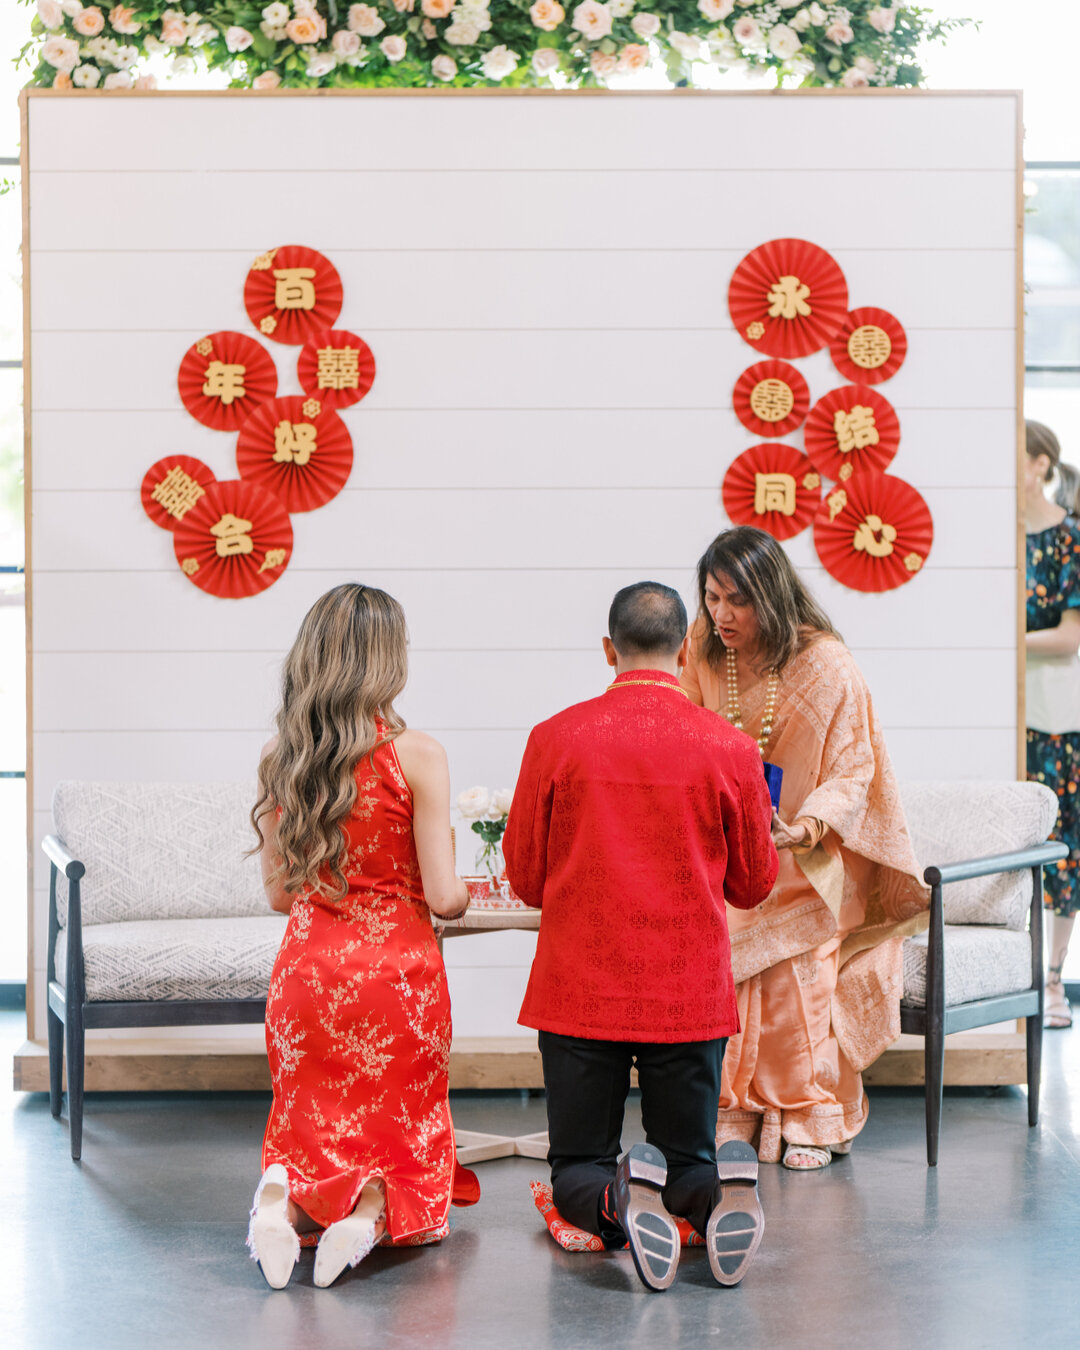 From Tea Ceremony to Baraat to Ceremony and after party... we LOVED this couple's traditions and how they utilized our entire space!​​​​​​​​​
Photography: @clickawayphoto
Planner: @eventsbysummerjoy
Florals: @nectarfloralboutique 

#onthrift #theruth